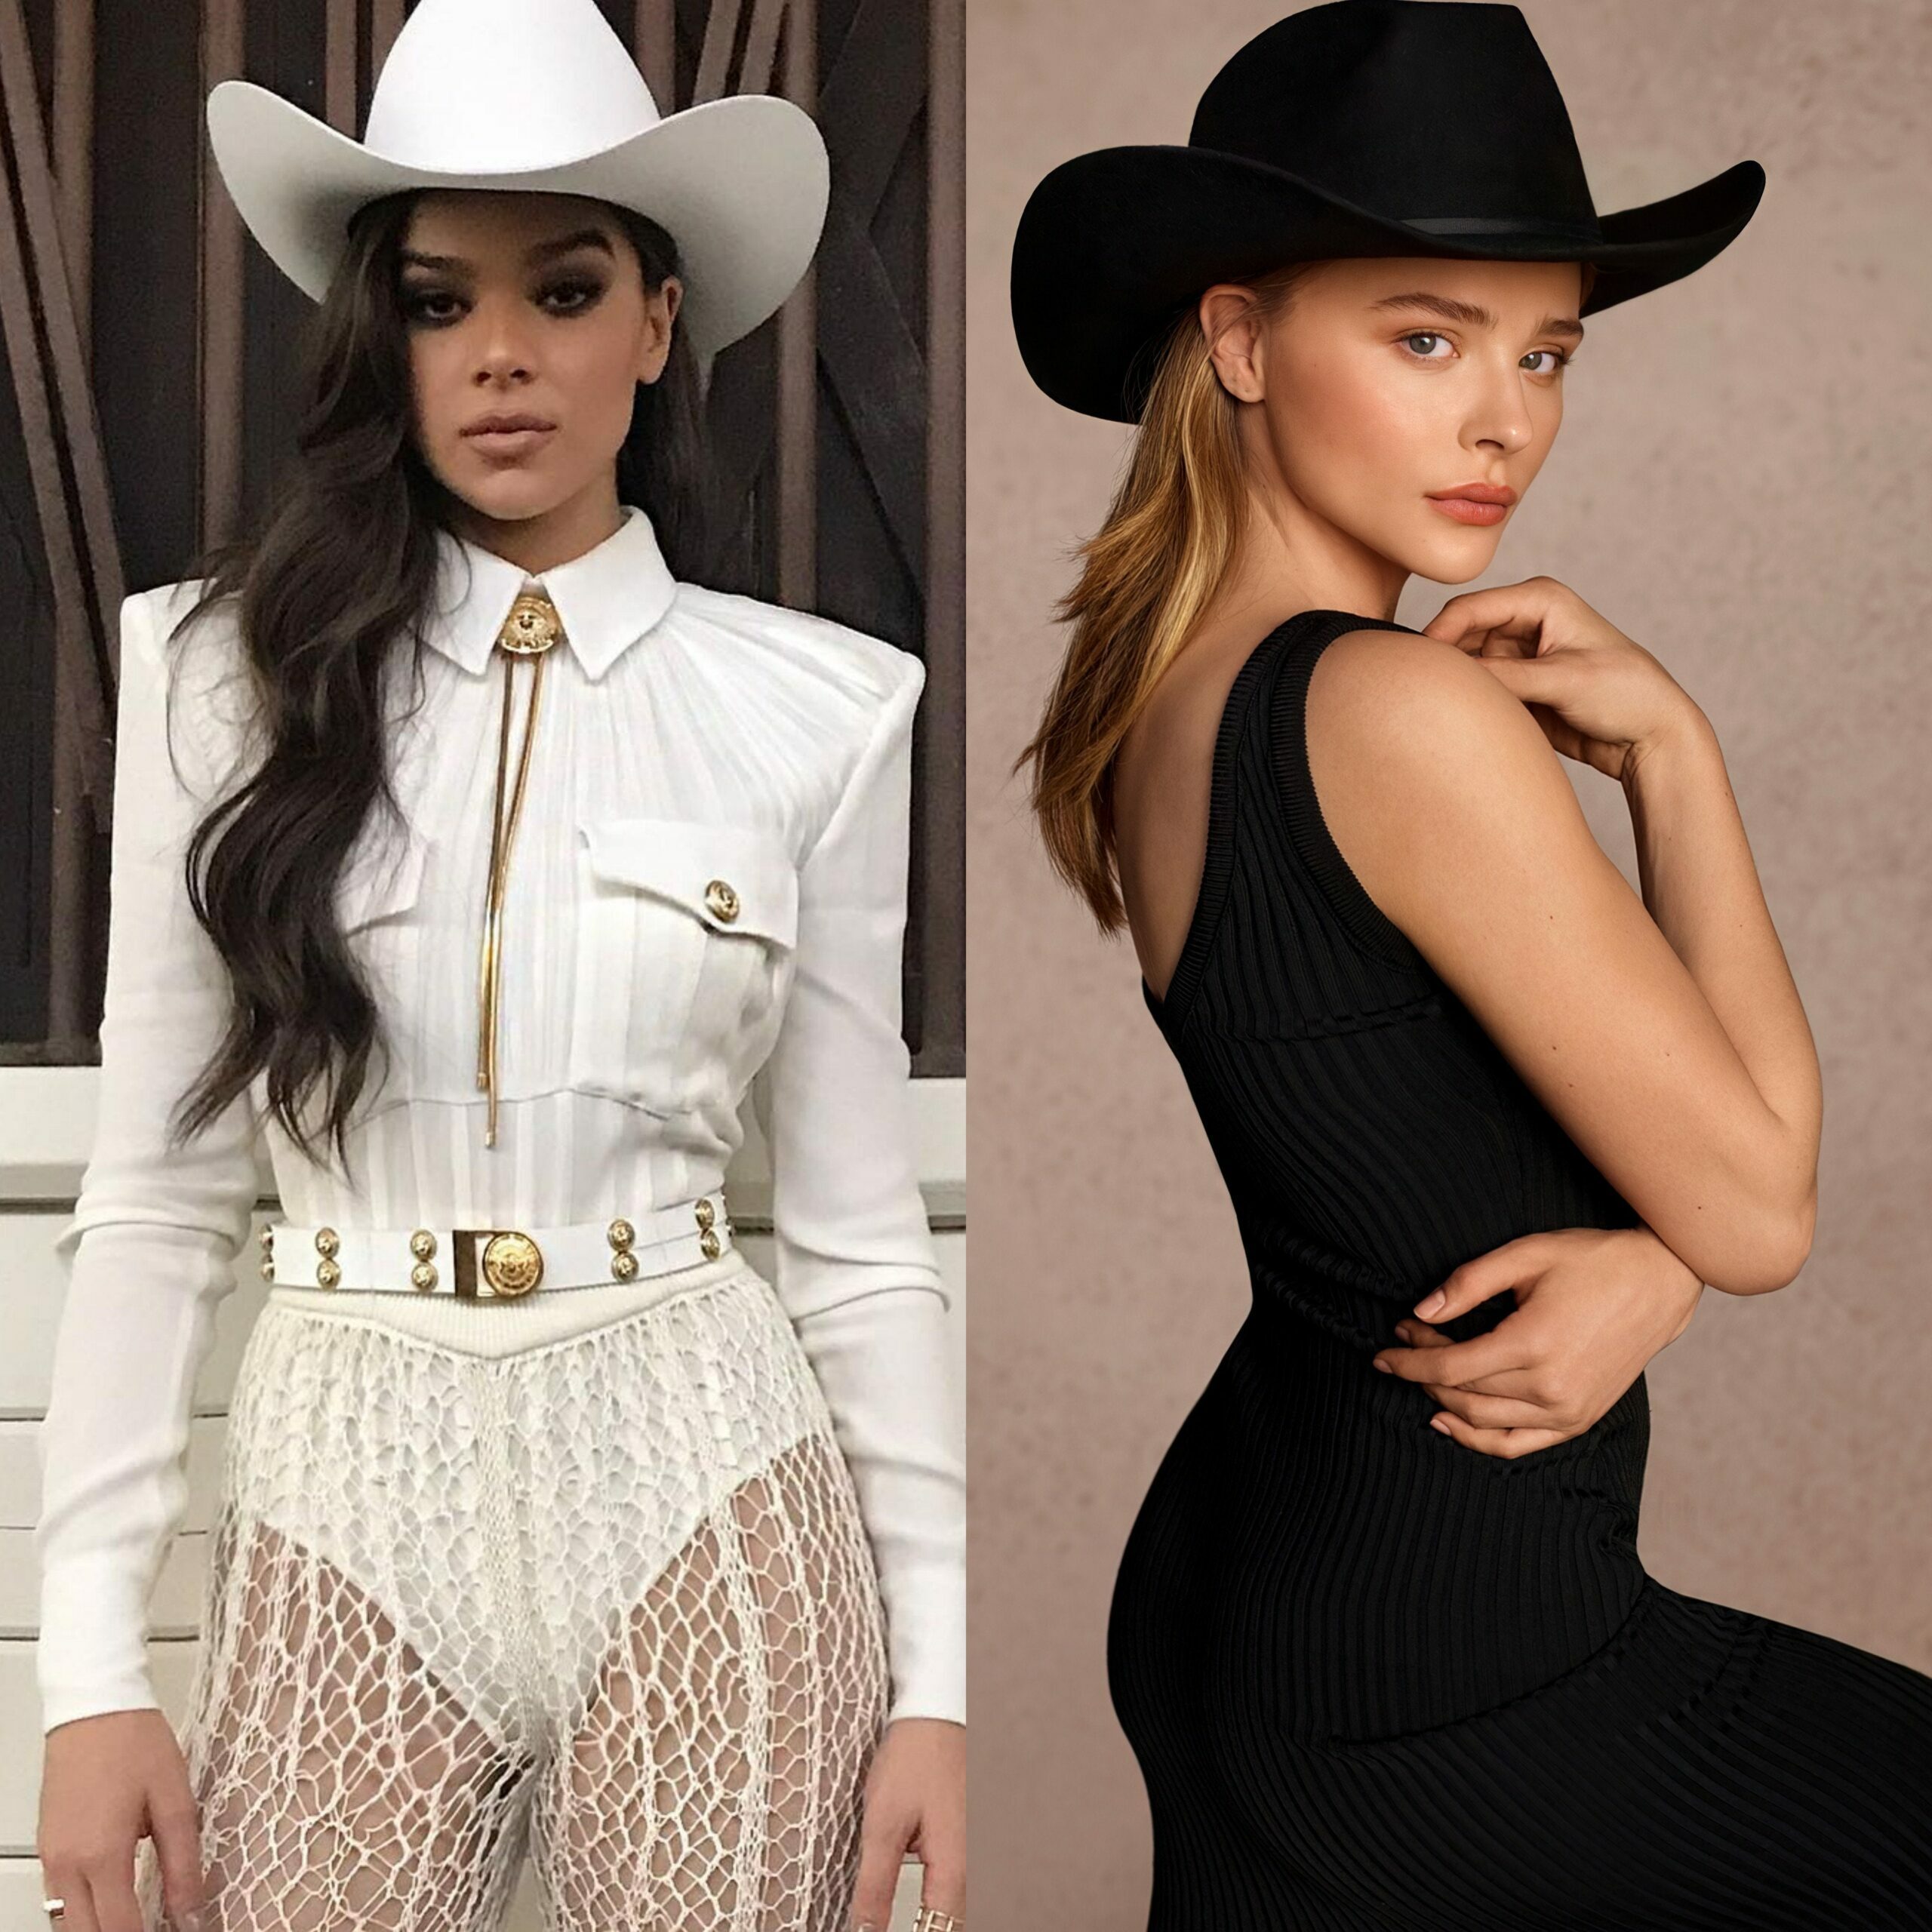 Would love to see Hailee Steinfeld and Chloe Moretz square